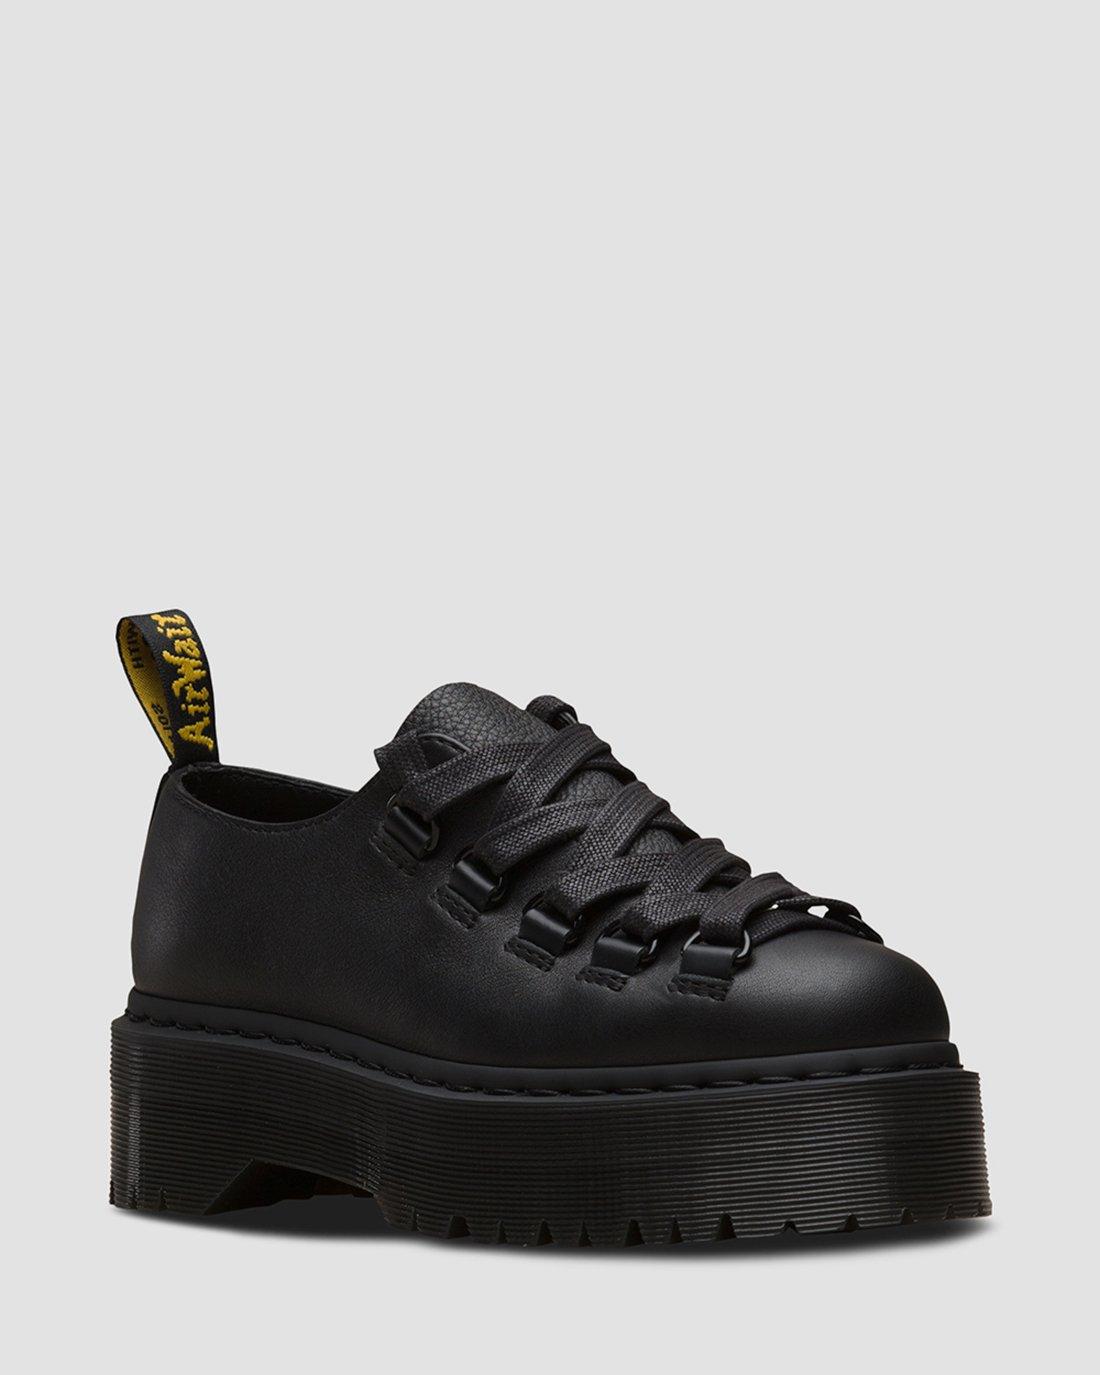 dr martens thick sole boots